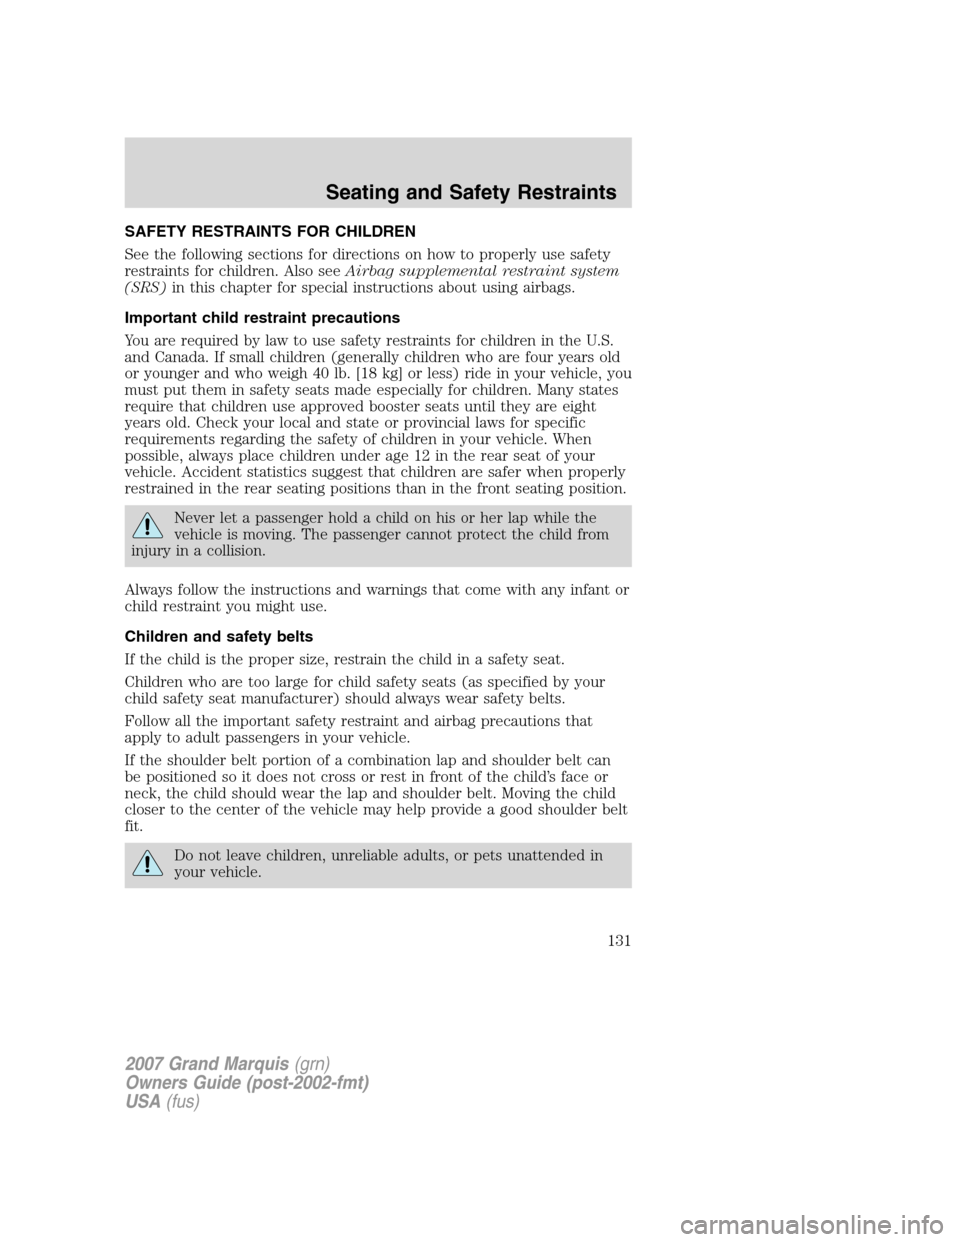 Mercury Grand Marquis 2007  s Owners Guide SAFETY RESTRAINTS FOR CHILDREN
See the following sections for directions on how to properly use safety
restraints for children. Also seeAirbag supplemental restraint system
(SRS)in this chapter for sp